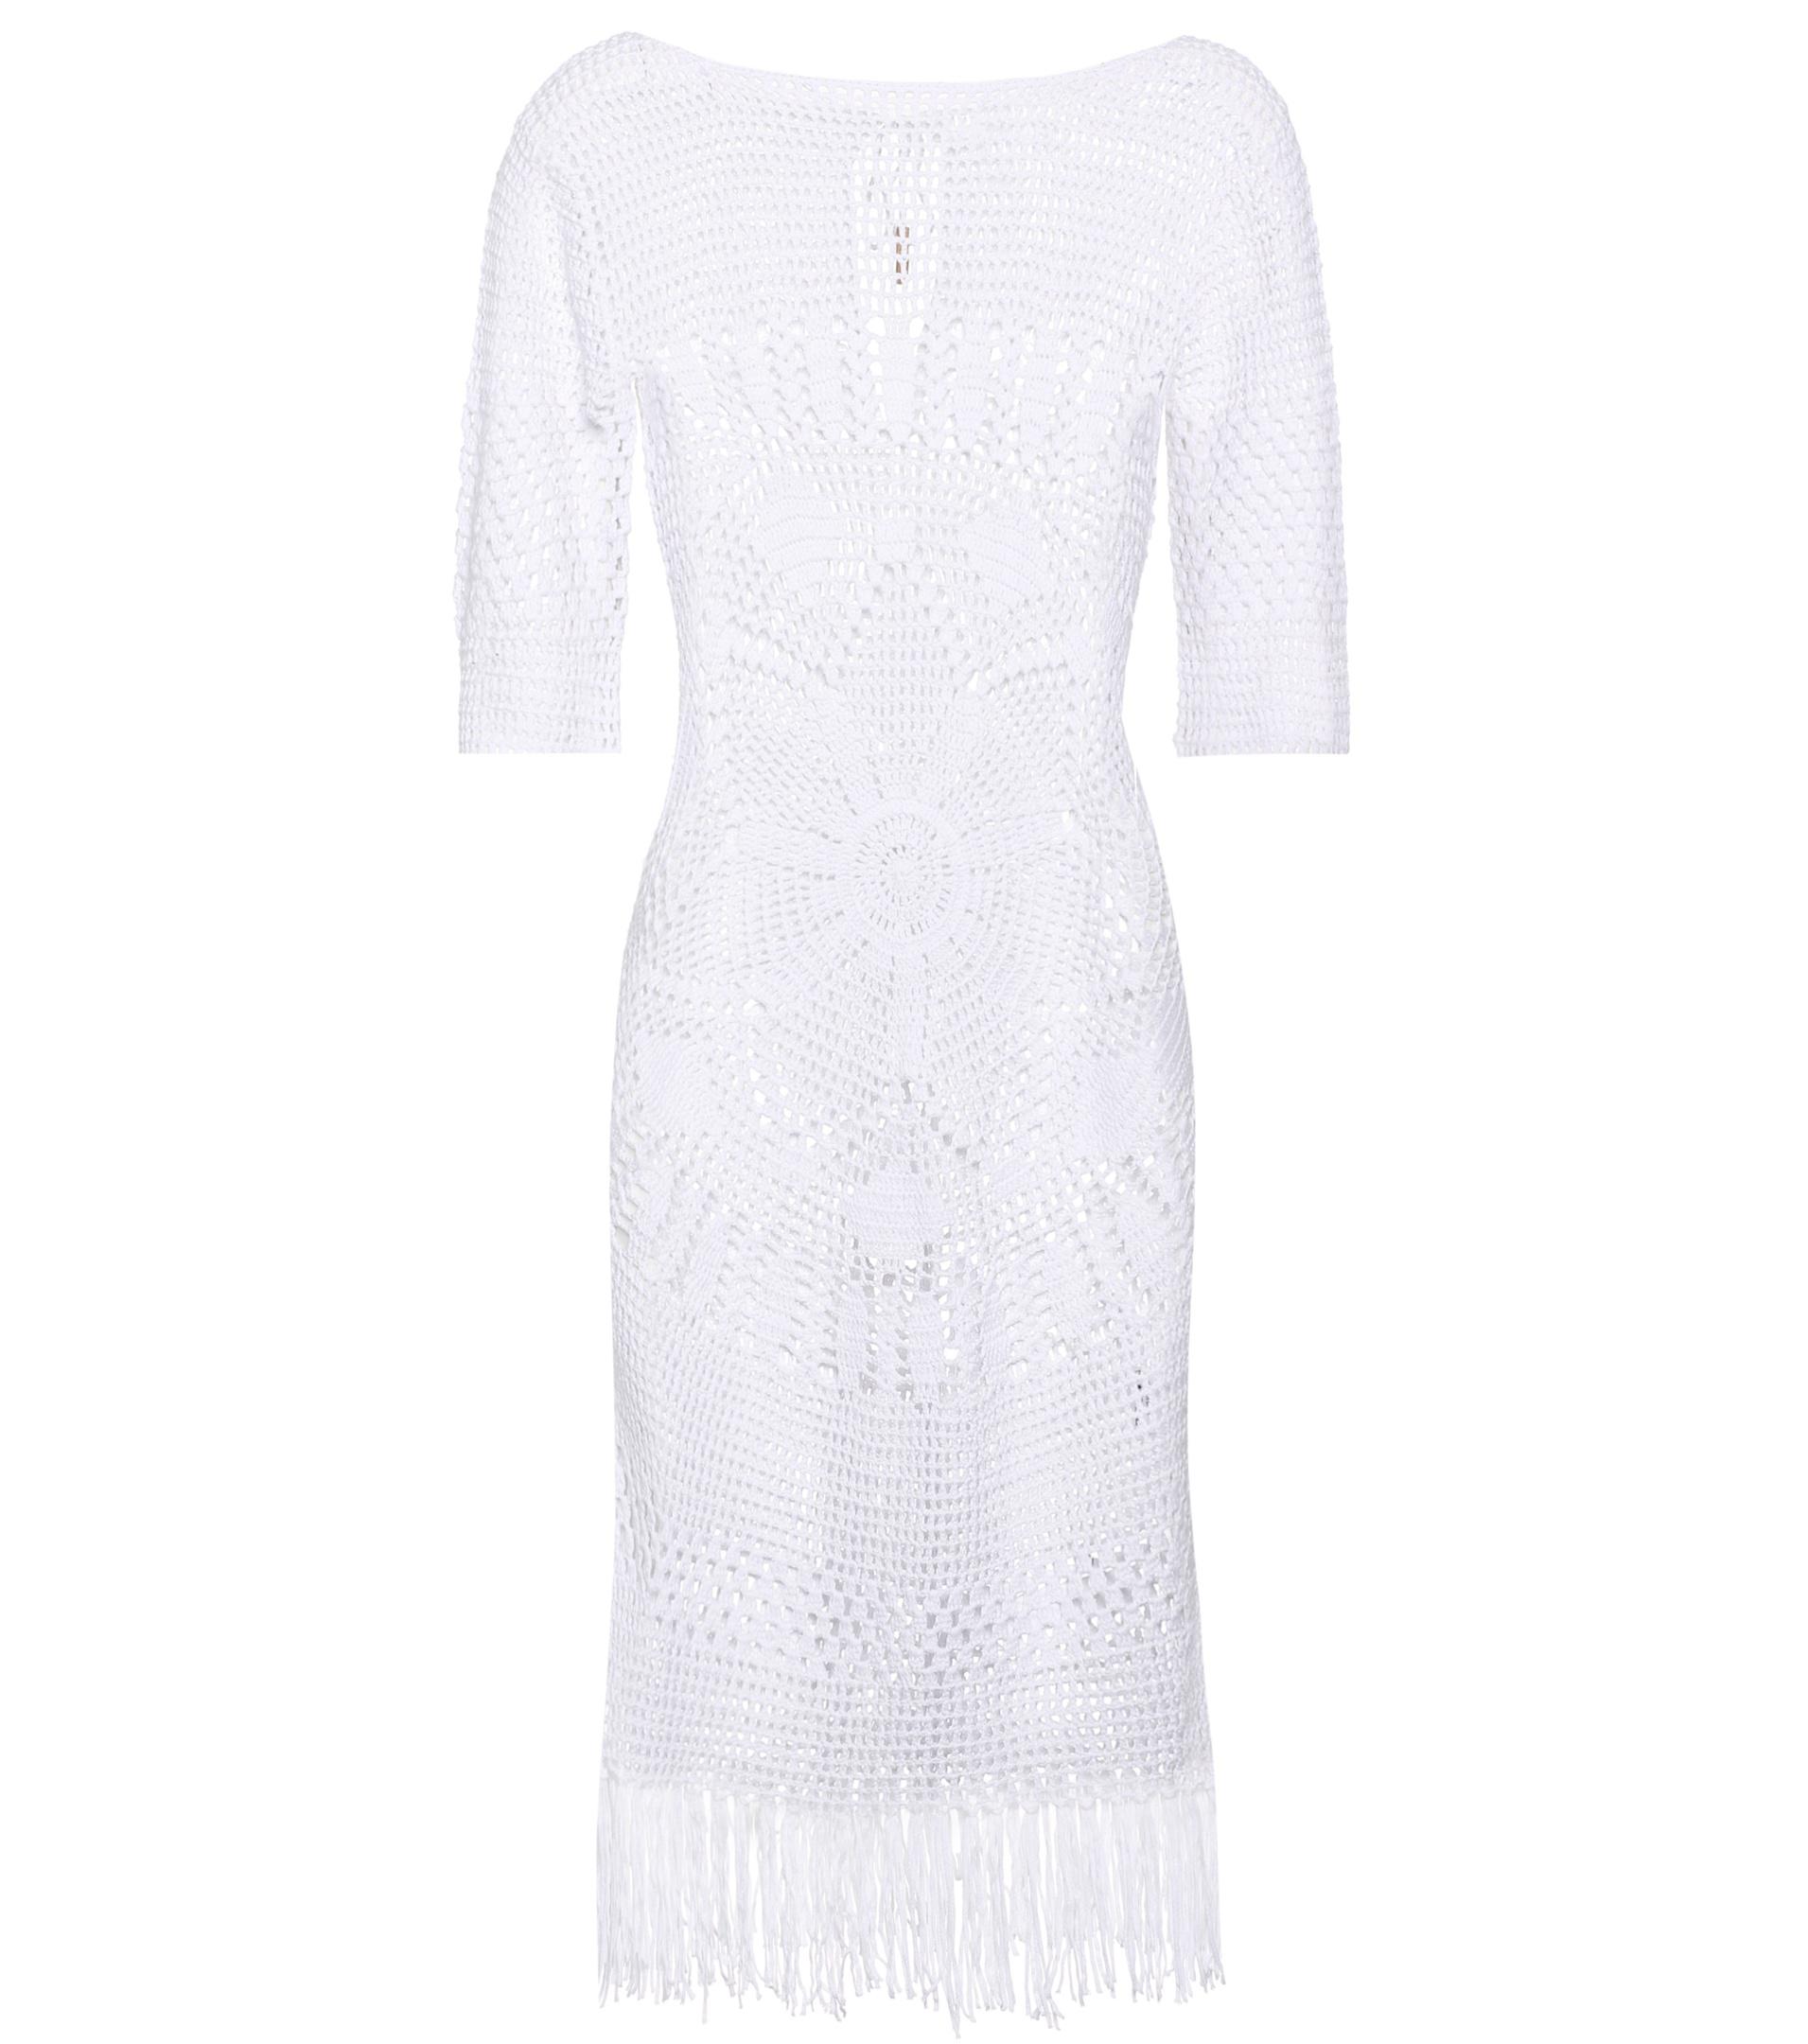 Melissa Odabash Melissa Knitted Cotton Dress in White - Lyst